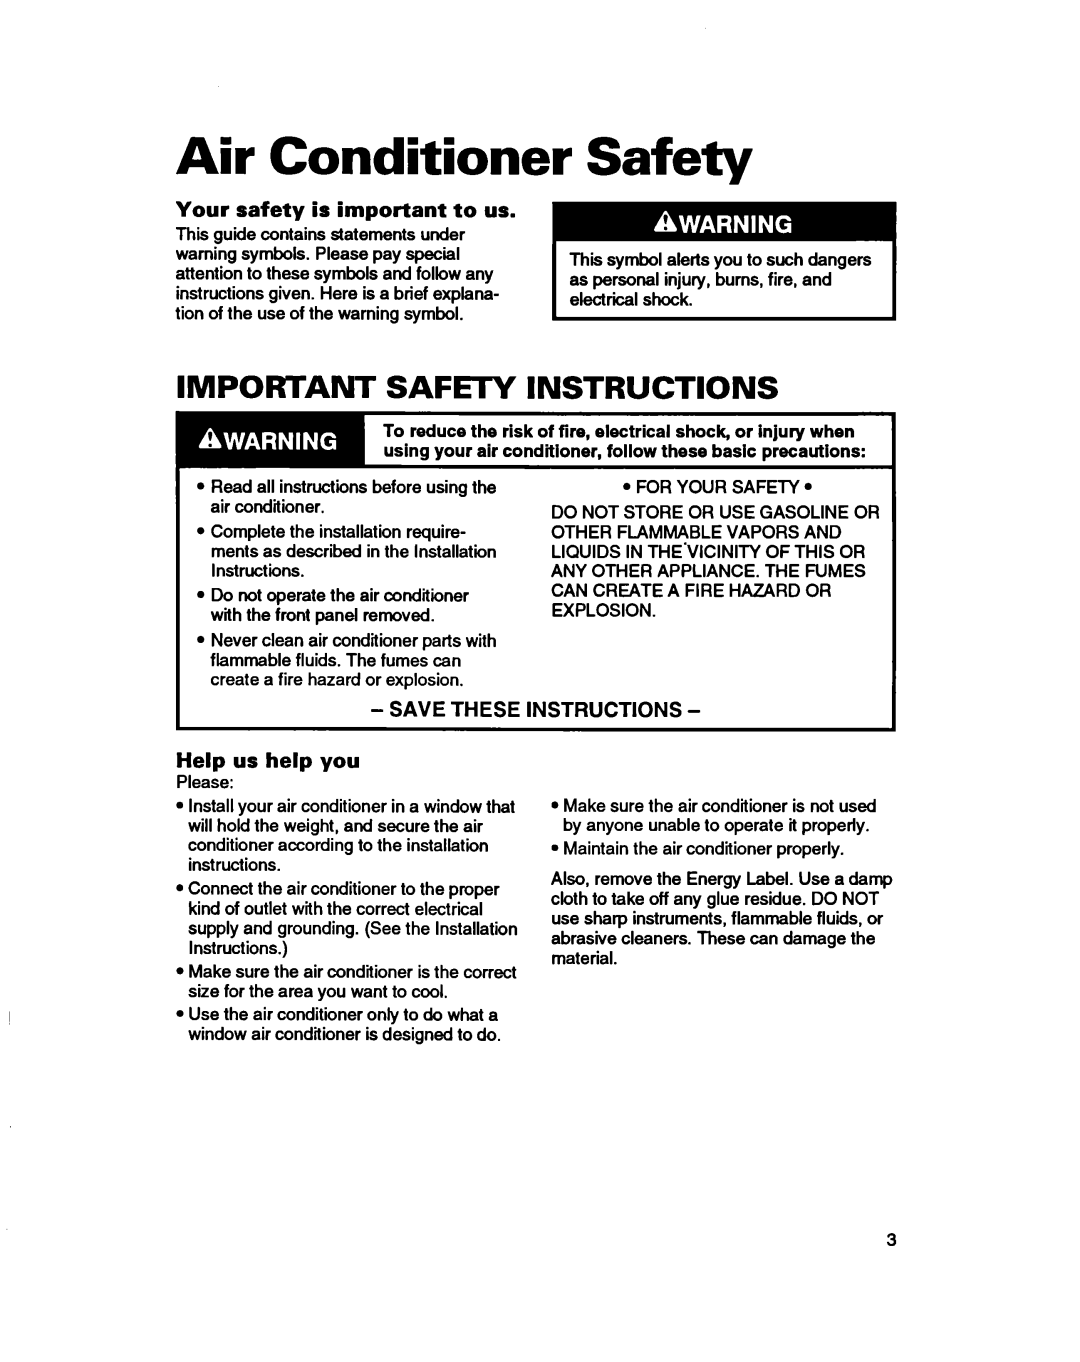 Whirlpool ACH082XD0 warranty Air Conditioner, Important Safety Instructions, Your safety is important to us 